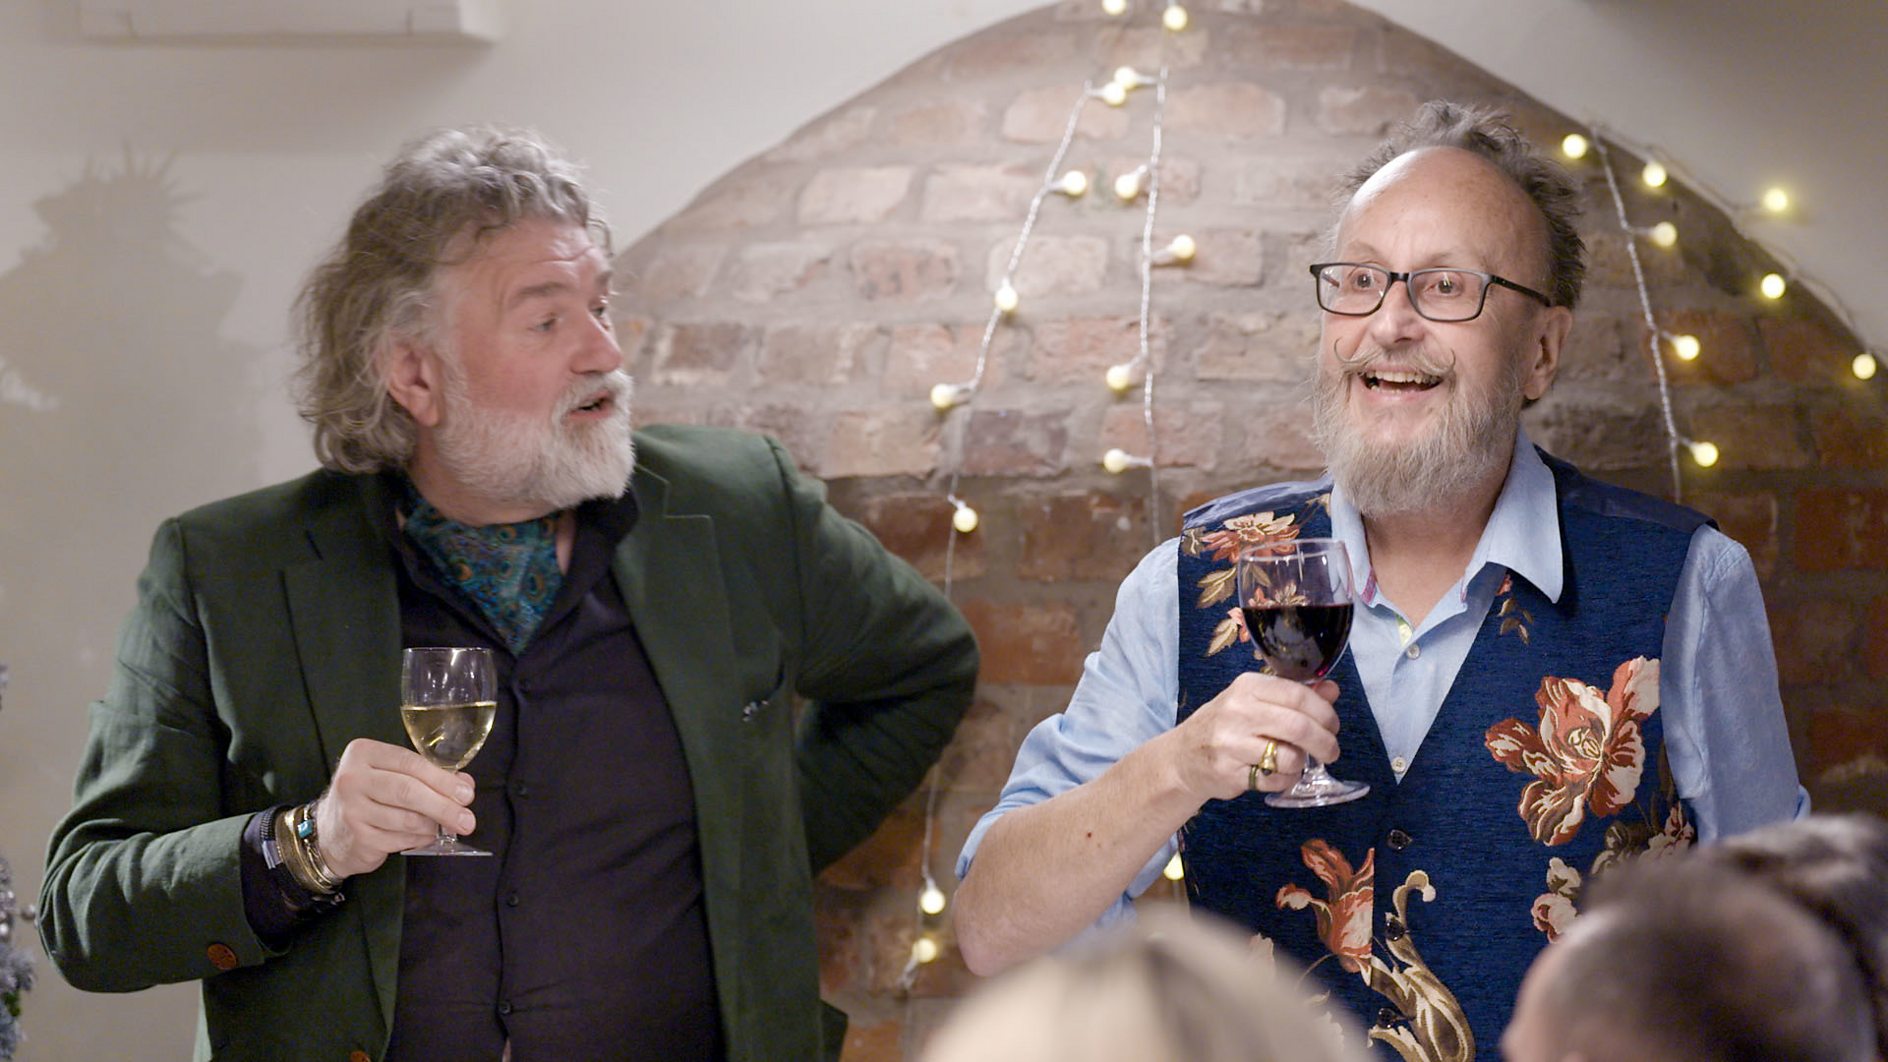 Interview with Dave Myers on The Hairy Bikers: Coming Home for Christmas airs Tuesday 19 December